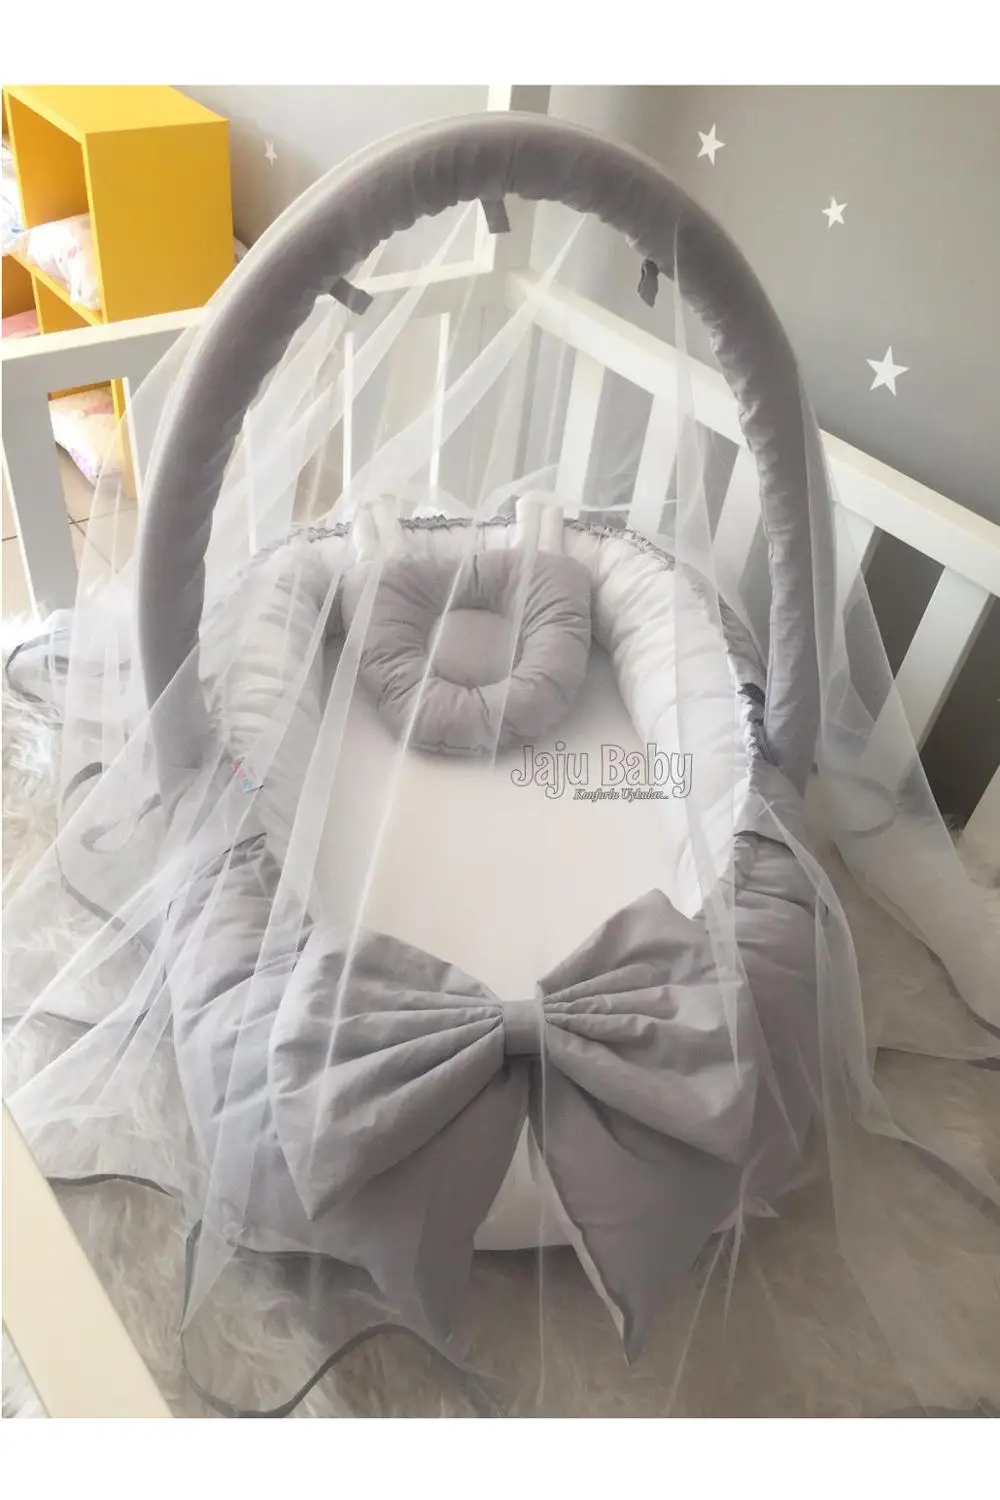 Jaju Baby Handmade Gray and White Fabric Mosquito Net and Toy Apparatus Luxury Design Babynest Mother Side Portable Baby Bed